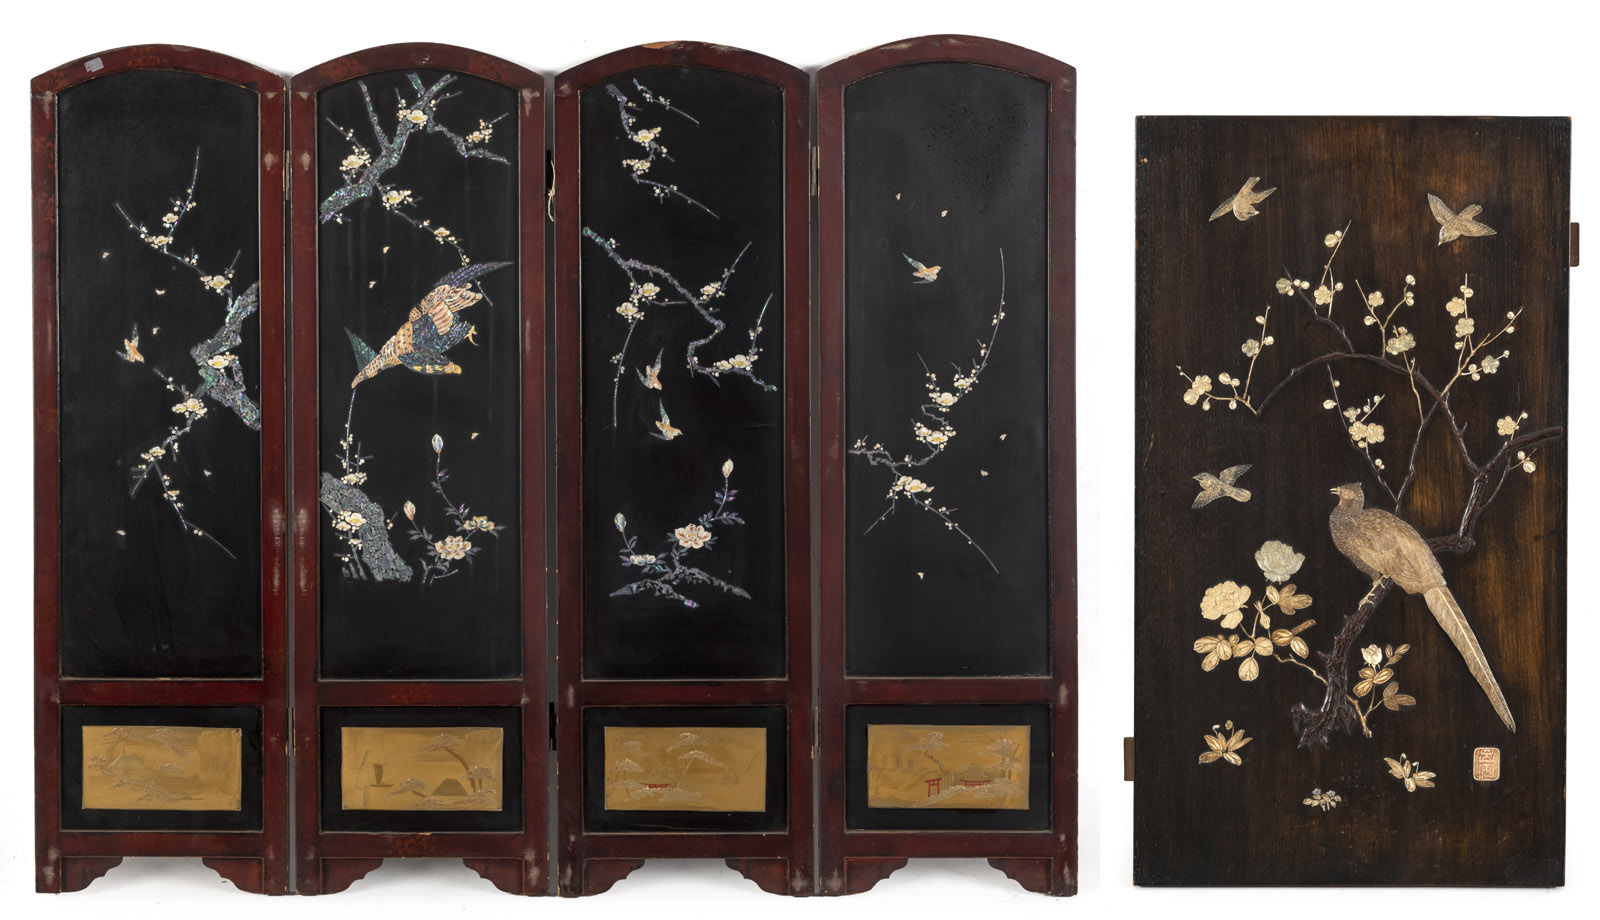 <b>A FOUR-PART MOTHER-OF-PEARL-INLAID FOLDING SCREEN AND A BONE- AND MOTHER-OF-PEARL-INLAID WOOD PANEL</b>